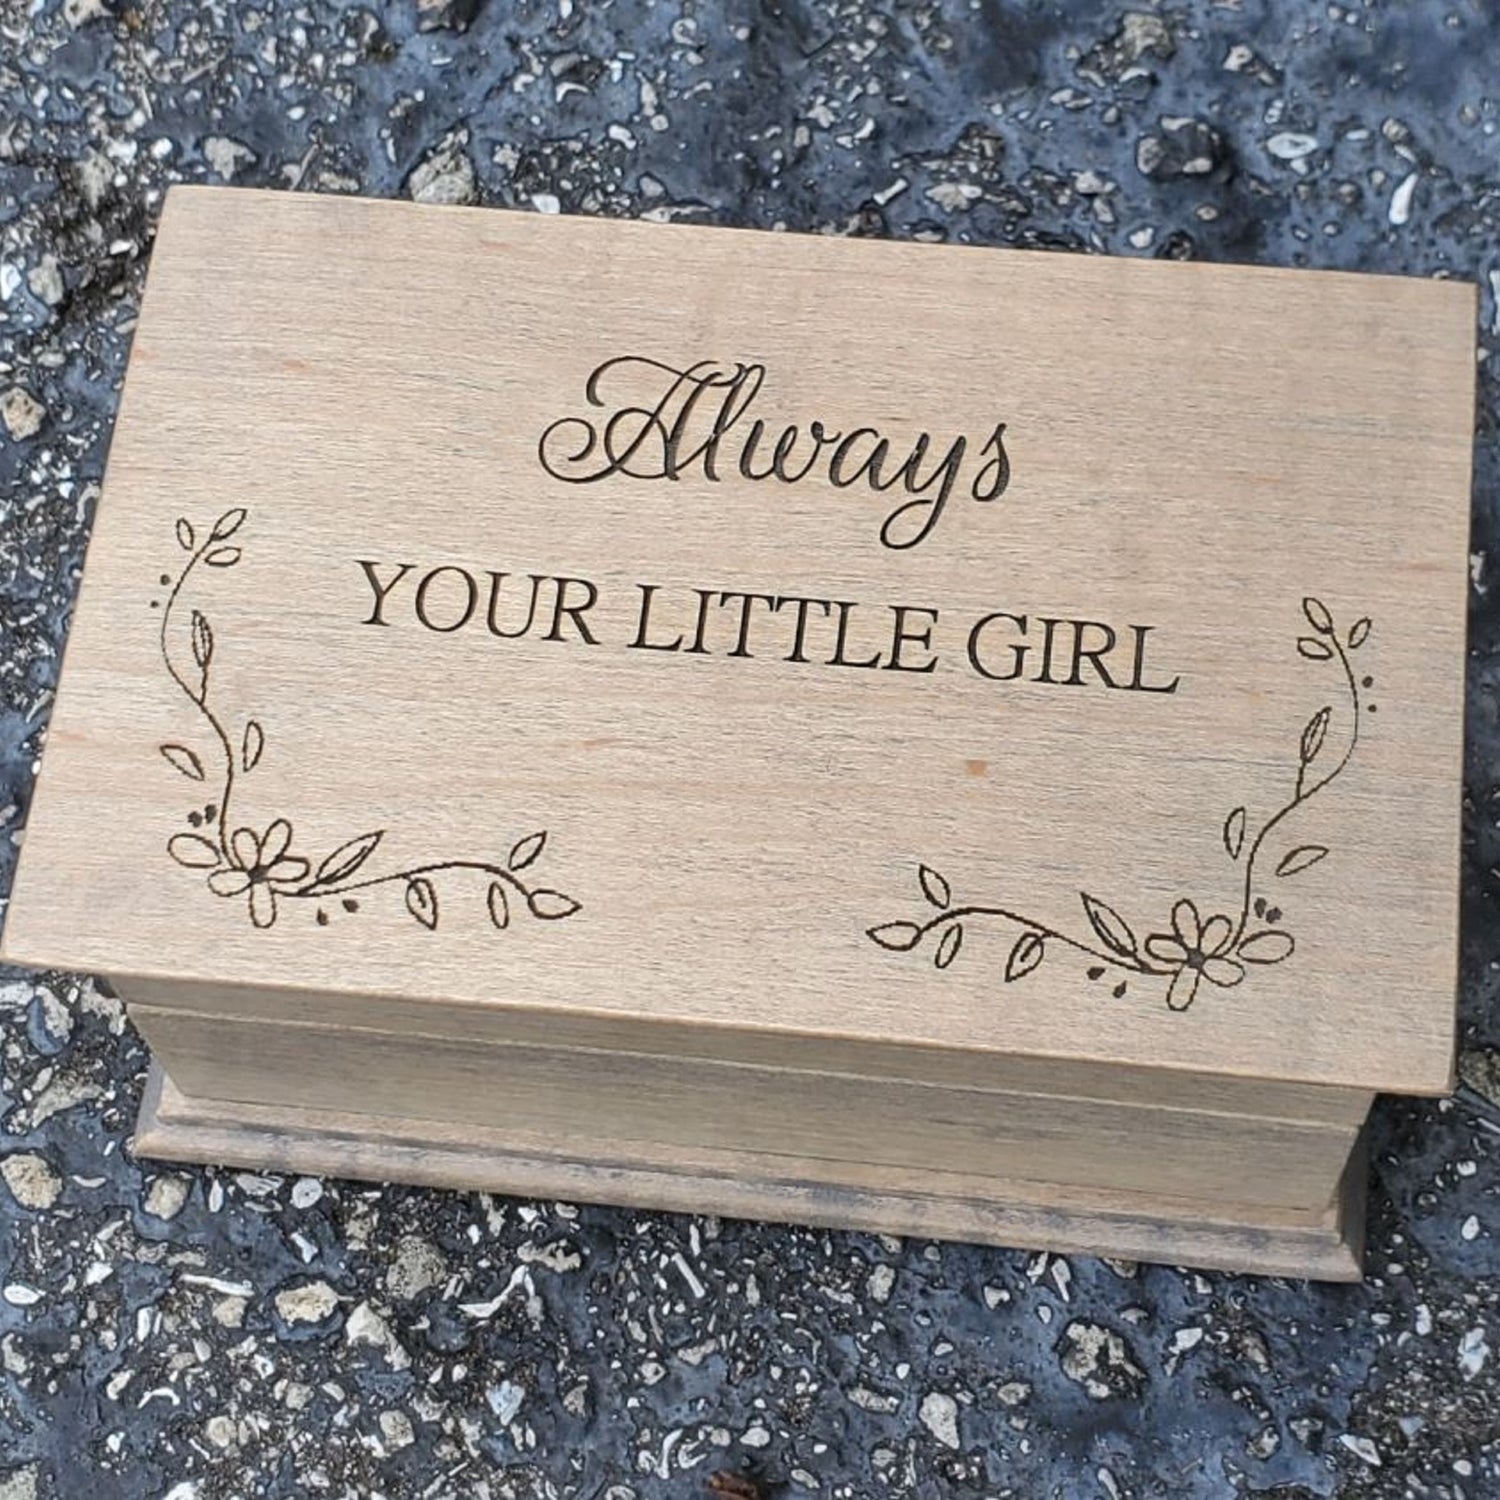 Jewelry box playing custom song choice, Always Your Little Girl engraved on the top 